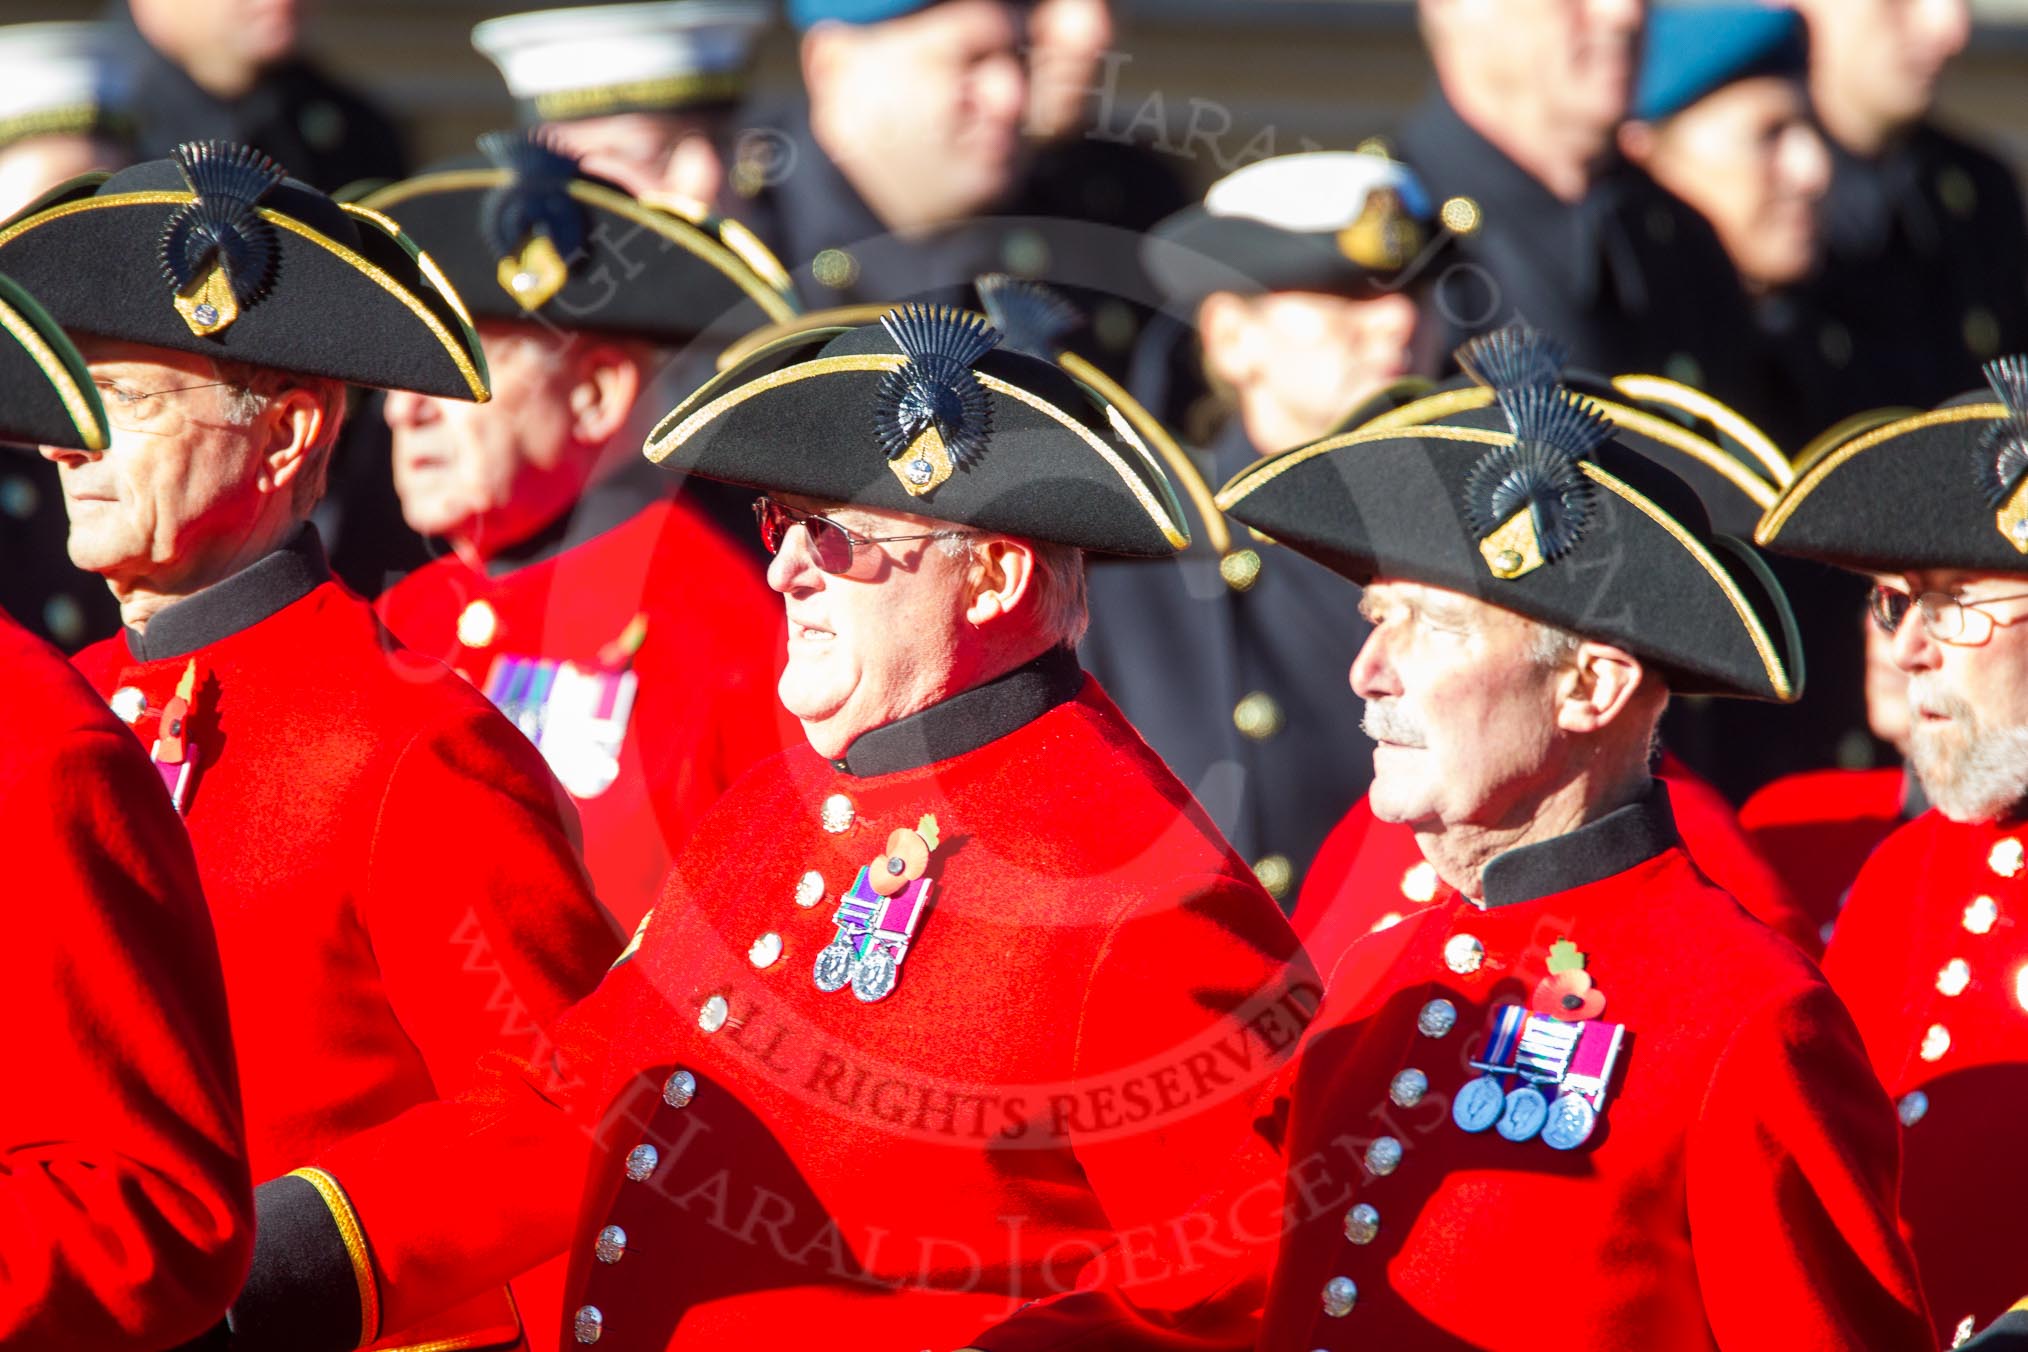 Remembrance Sunday Cenotaph March Past 2013: D30 - Royal Hospital Chelsea, the Chelsea Pensioners..
Press stand opposite the Foreign Office building, Whitehall, London SW1,
London,
Greater London,
United Kingdom,
on 10 November 2013 at 11:43, image #271